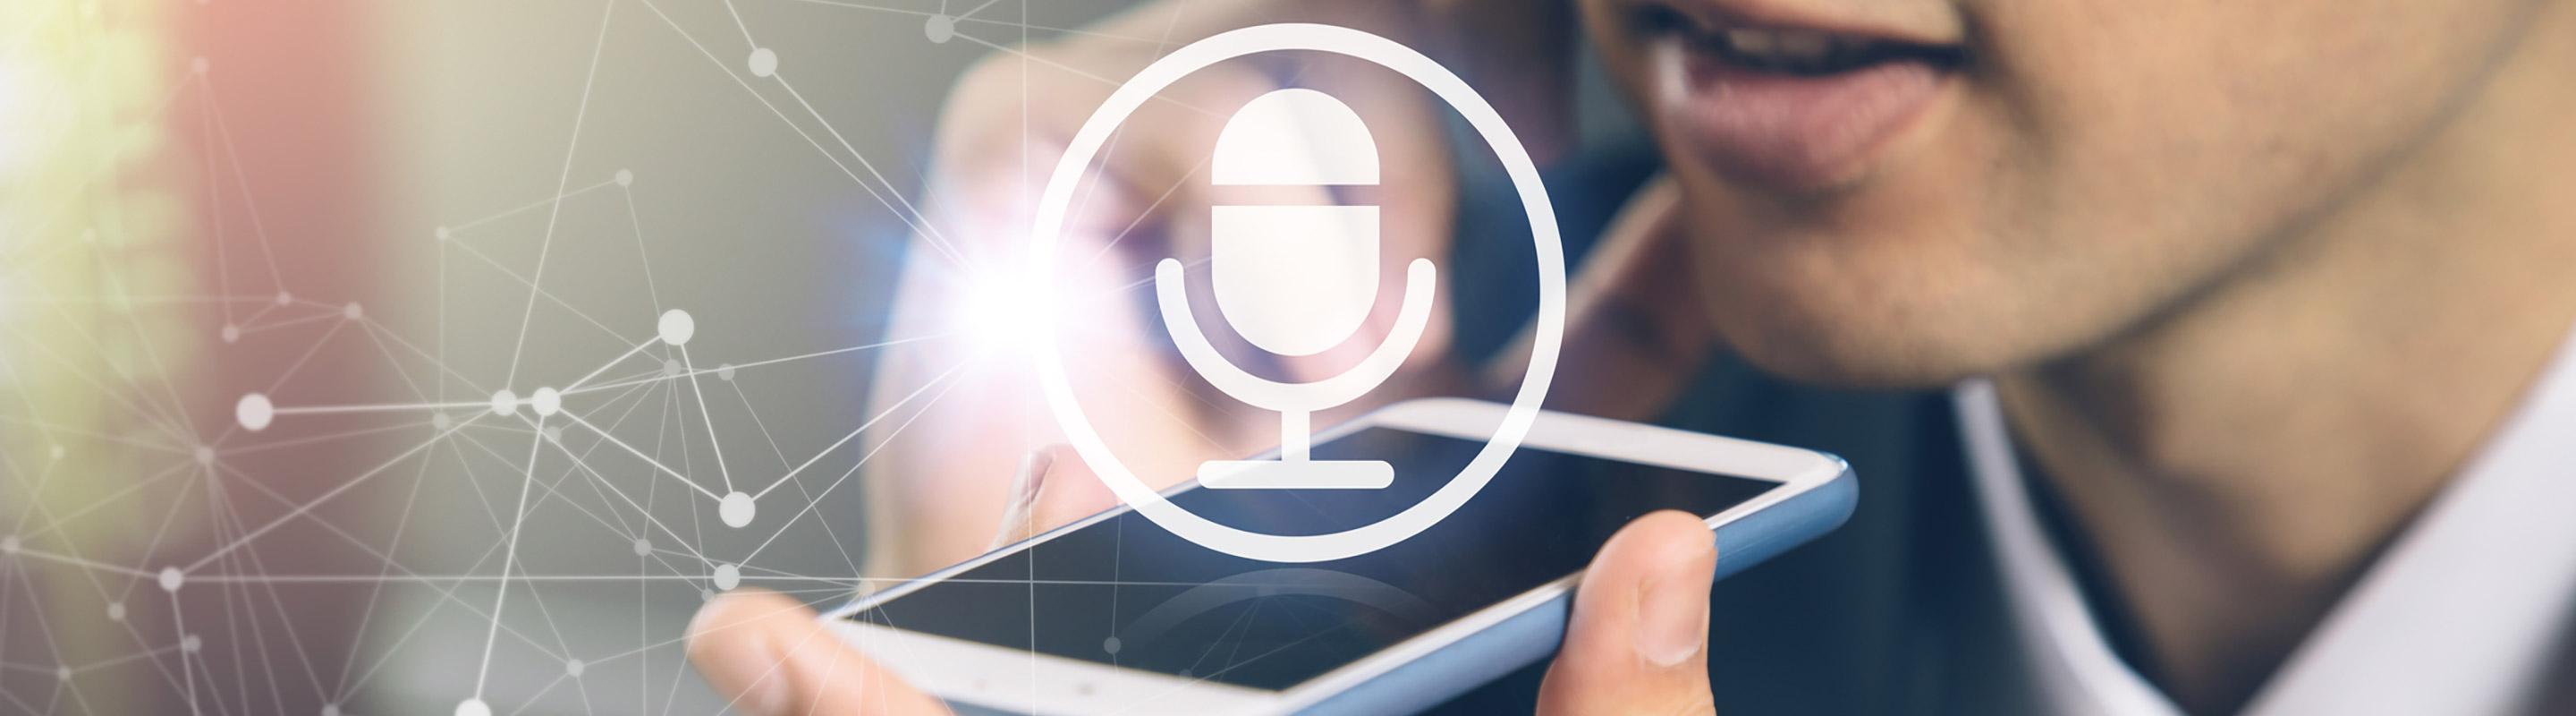 Telenor explores automatic voice recognition for live readings of customer sentiment in Norway